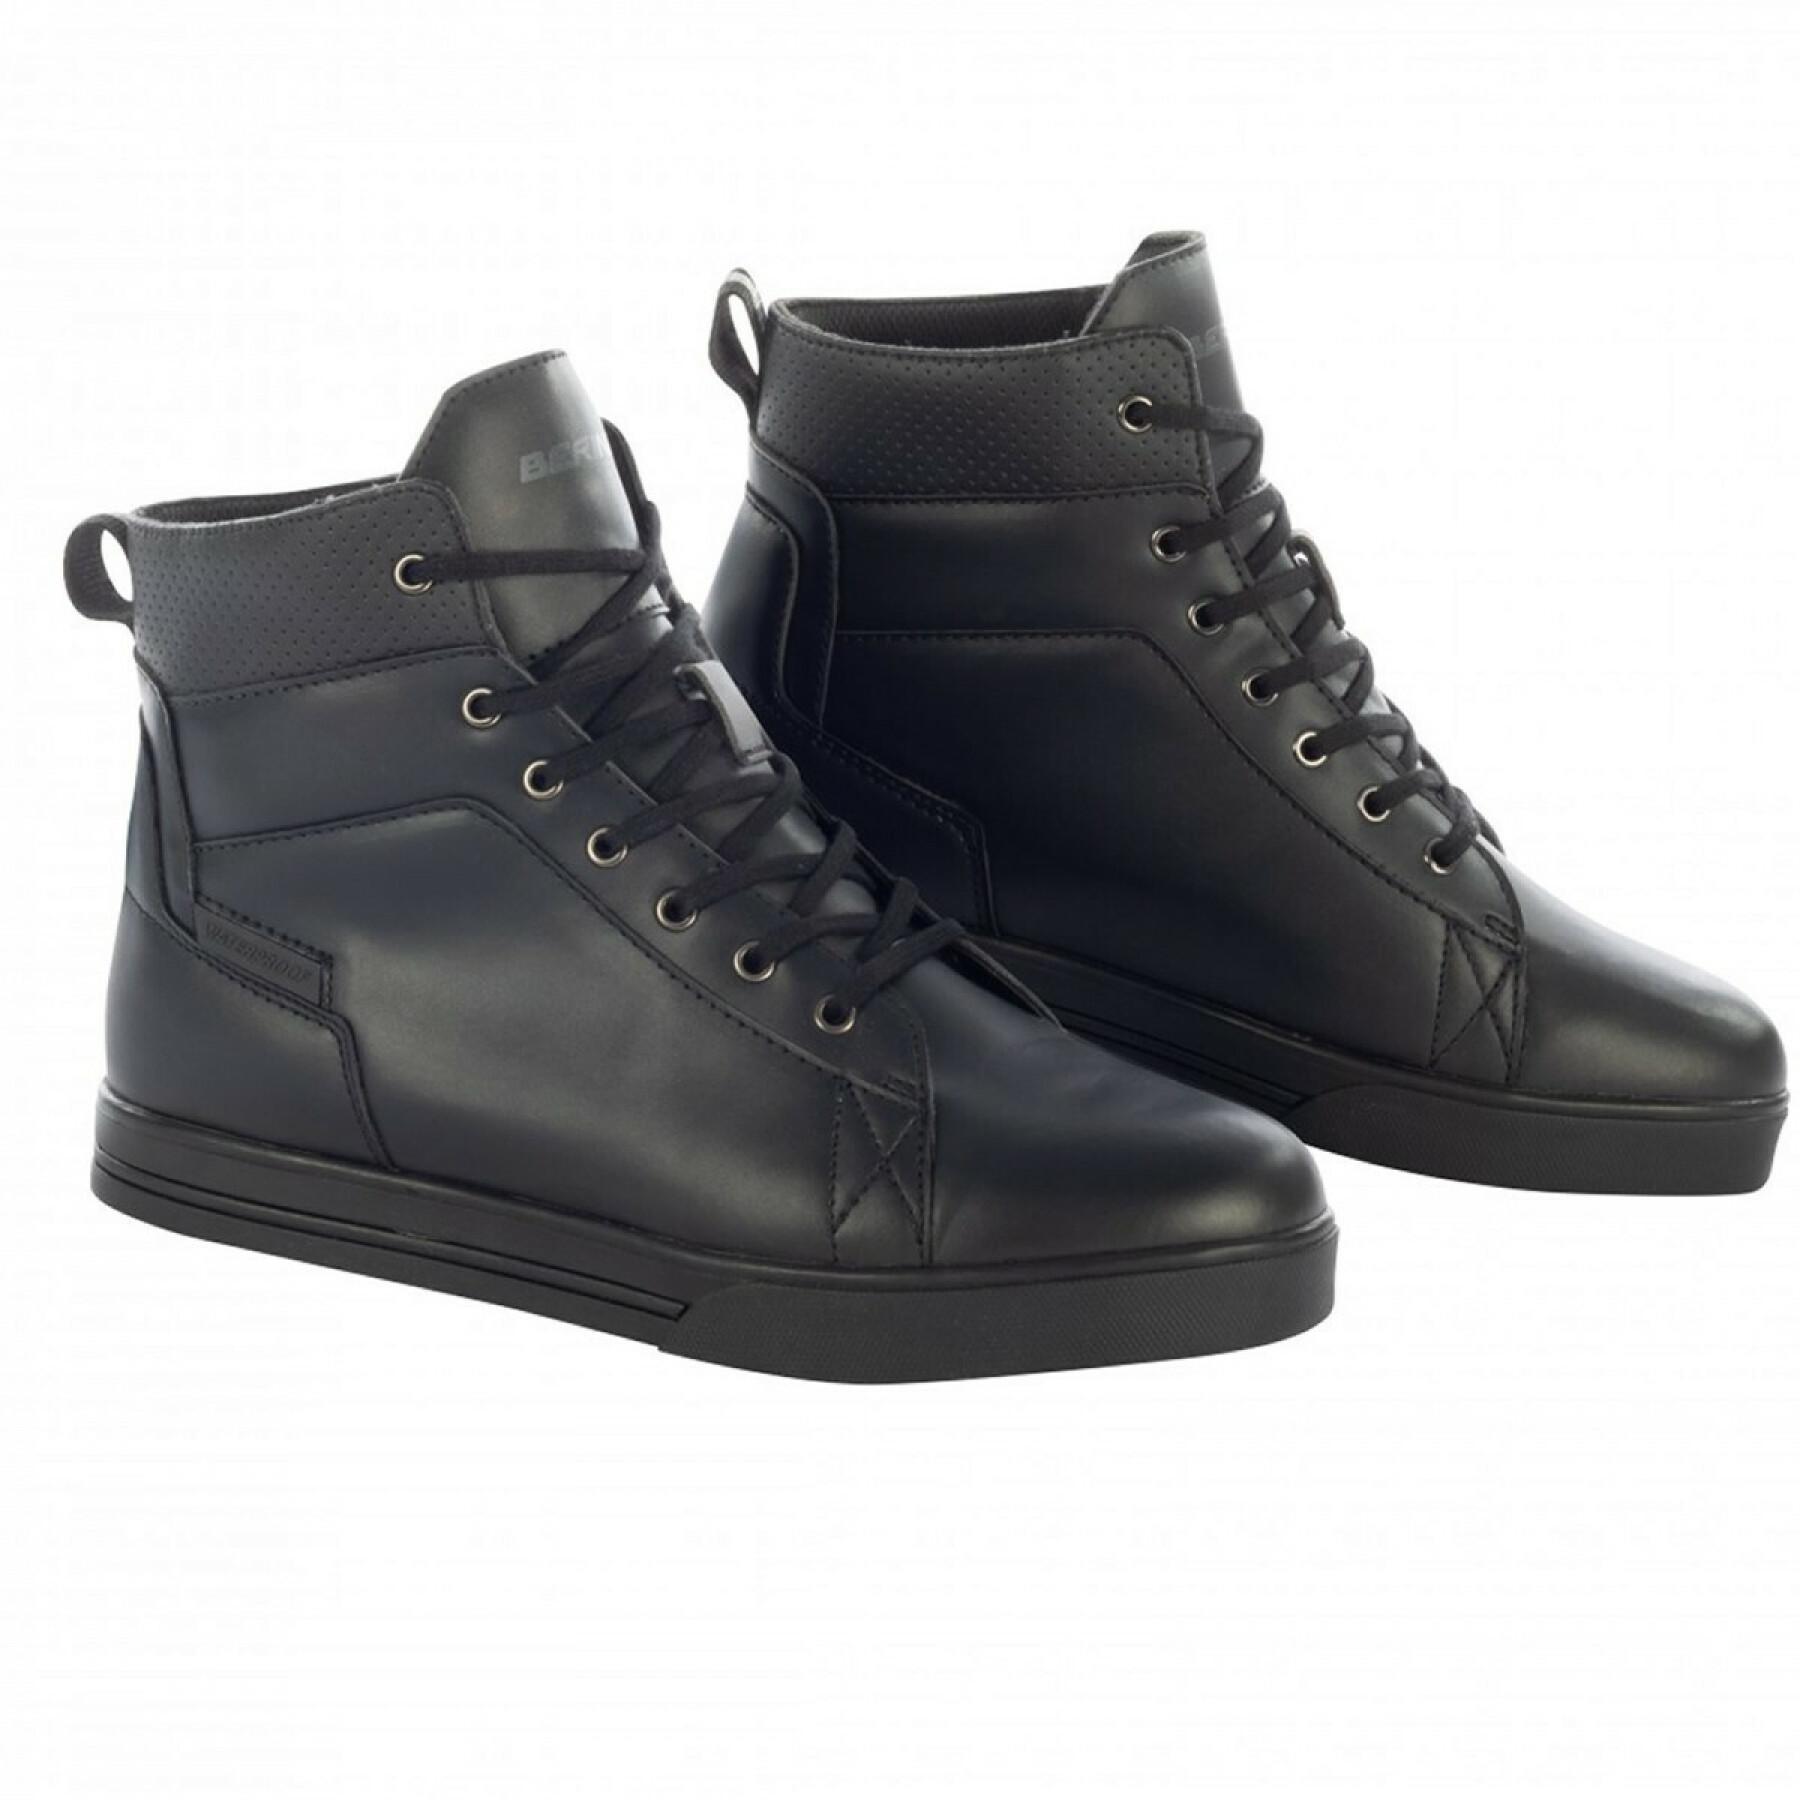 Chaussures moto Bering Indy